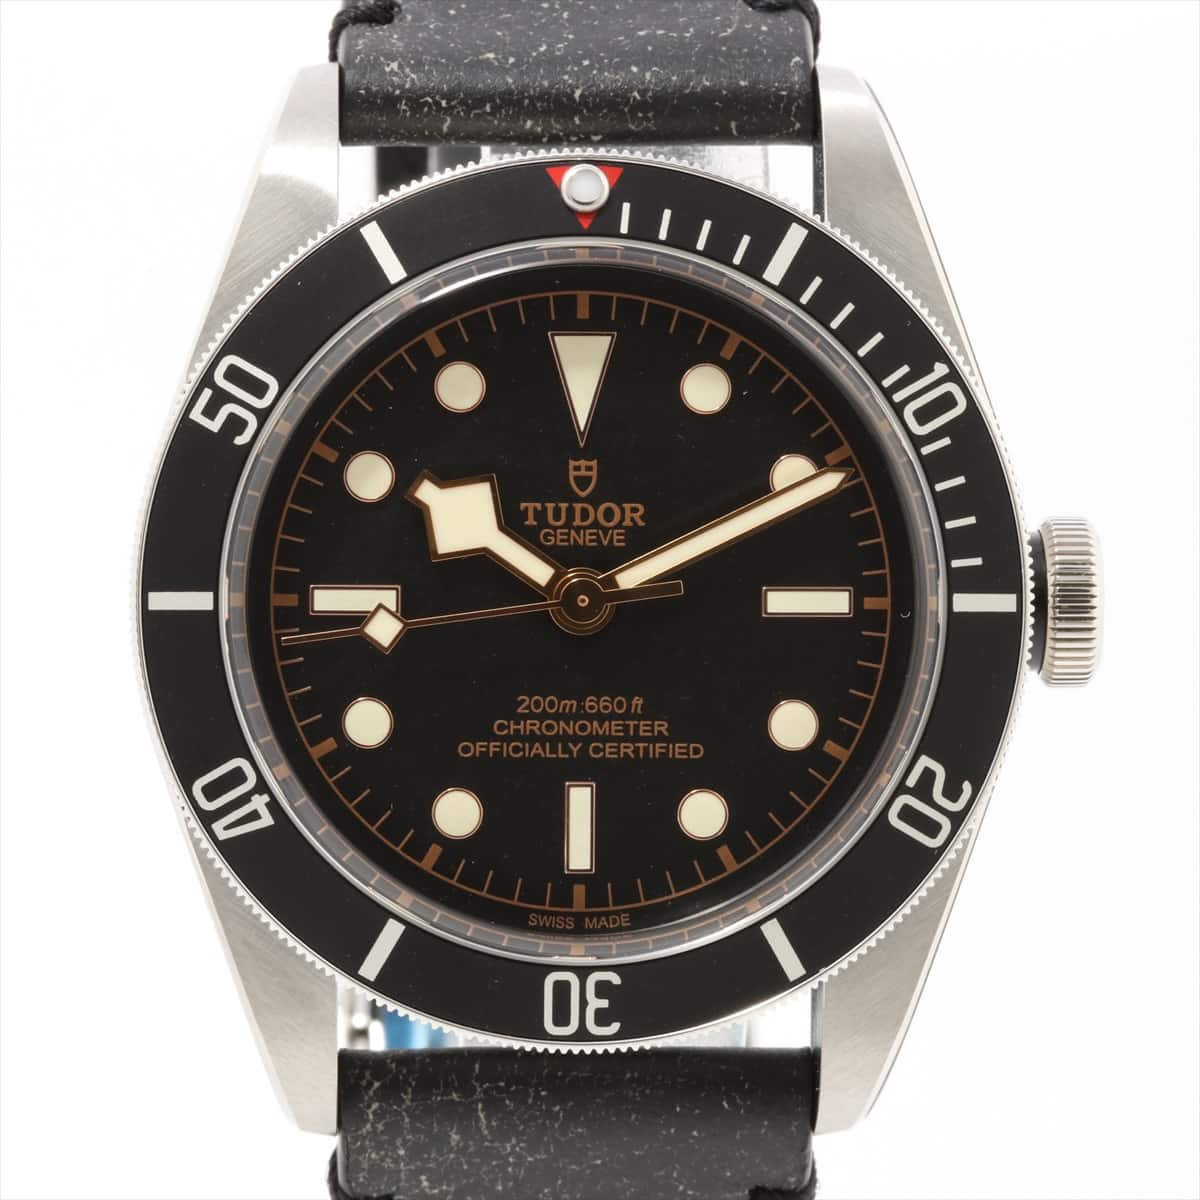 Tudor Heritage Black bay 79230N SS & Leather AT Black-Face Inner box only